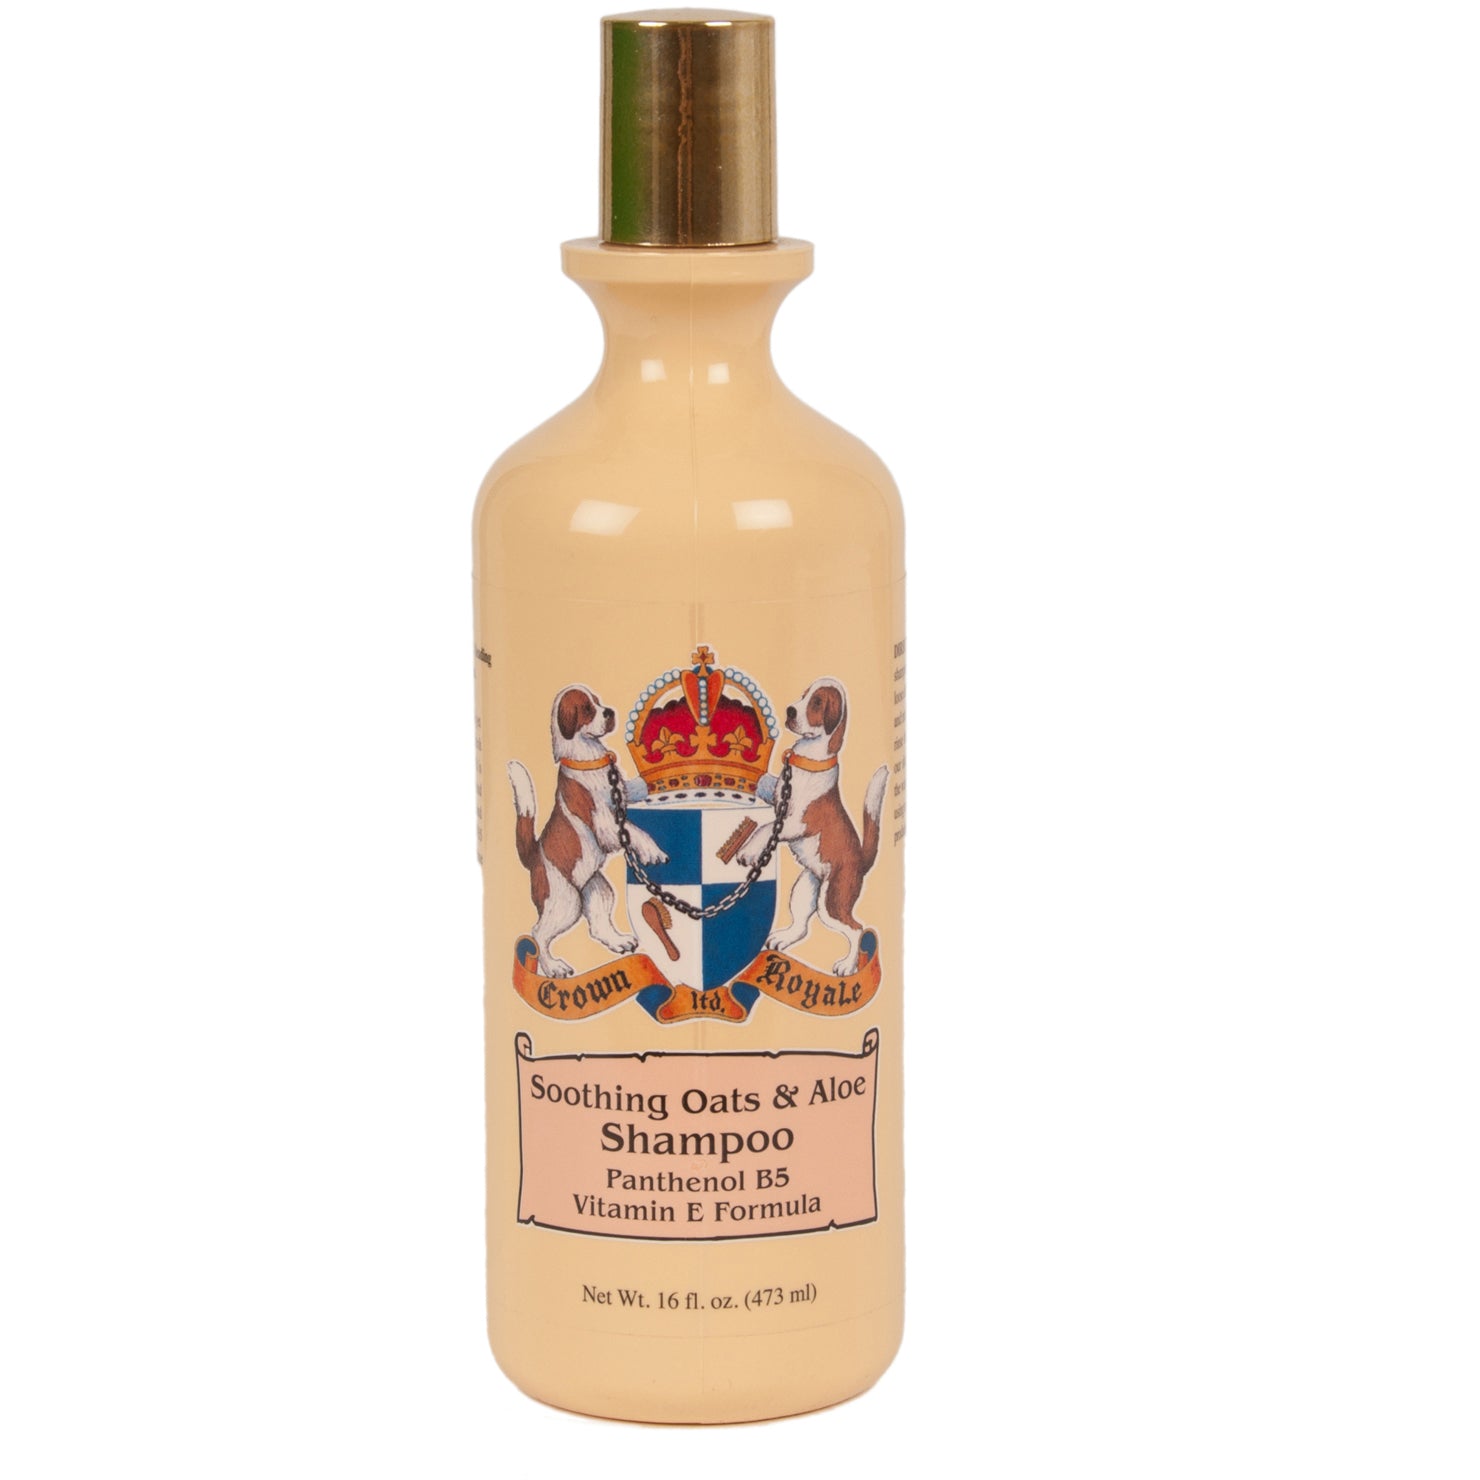 Crown Royale Soothing Oats & Aloe Shampoo For Dogs, 16oz